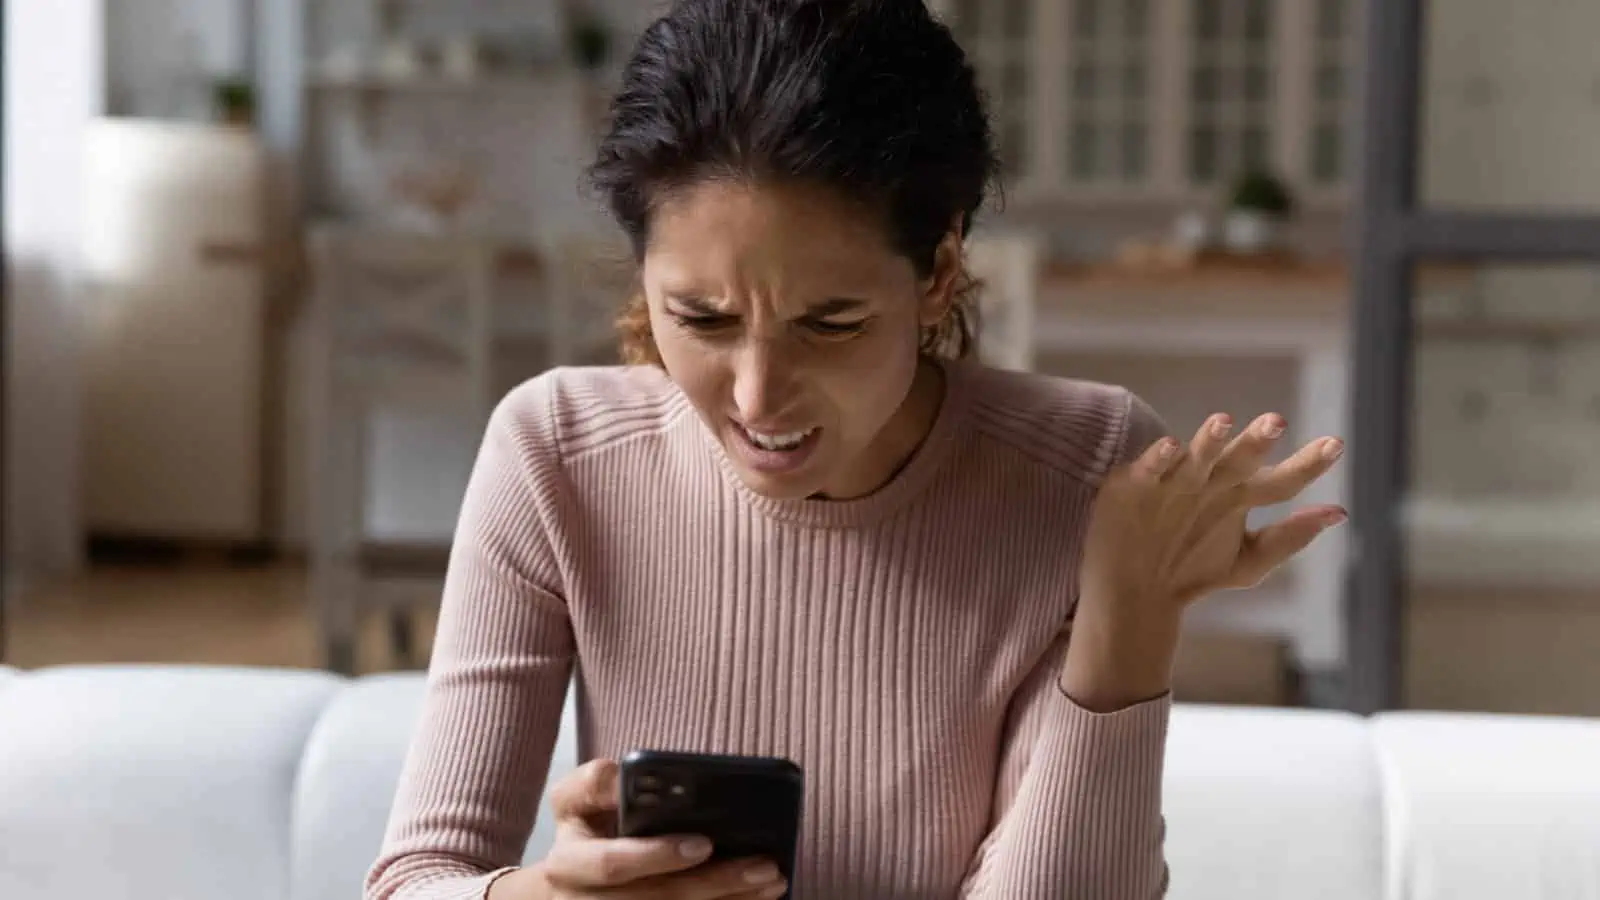 woman shocked at her phone mad